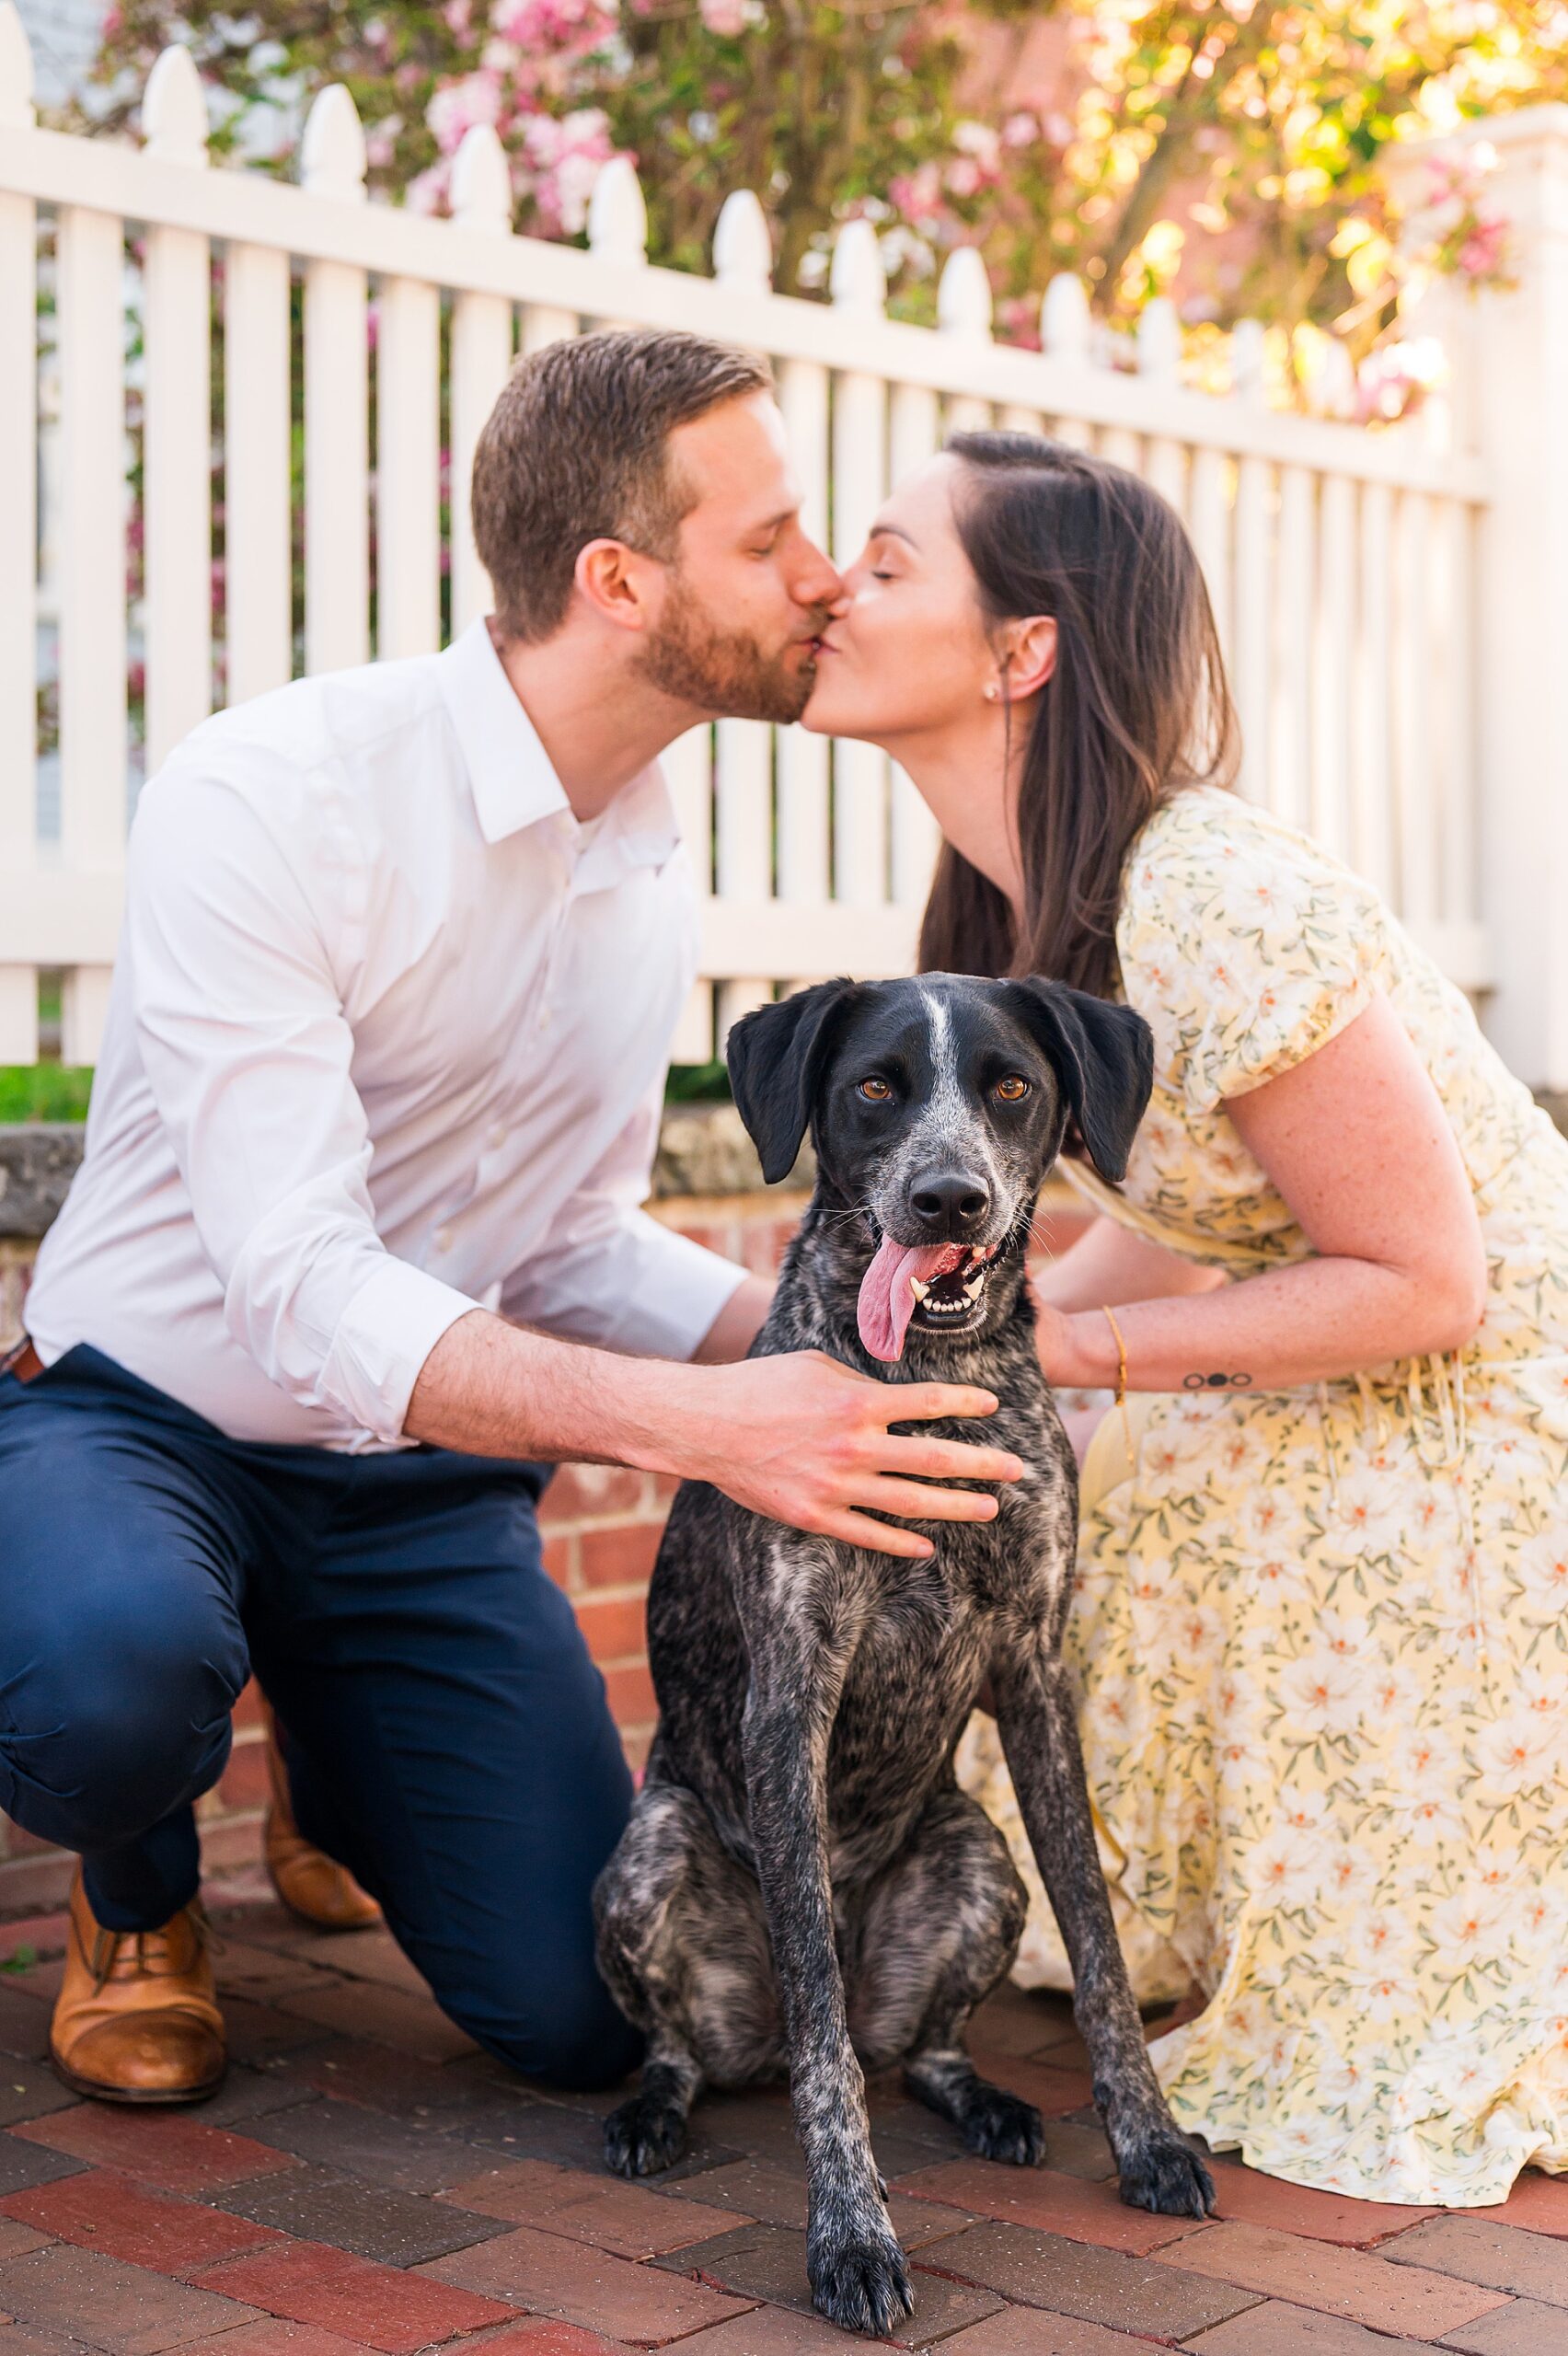 Summer Engagement Portraits with couples' dog in New England